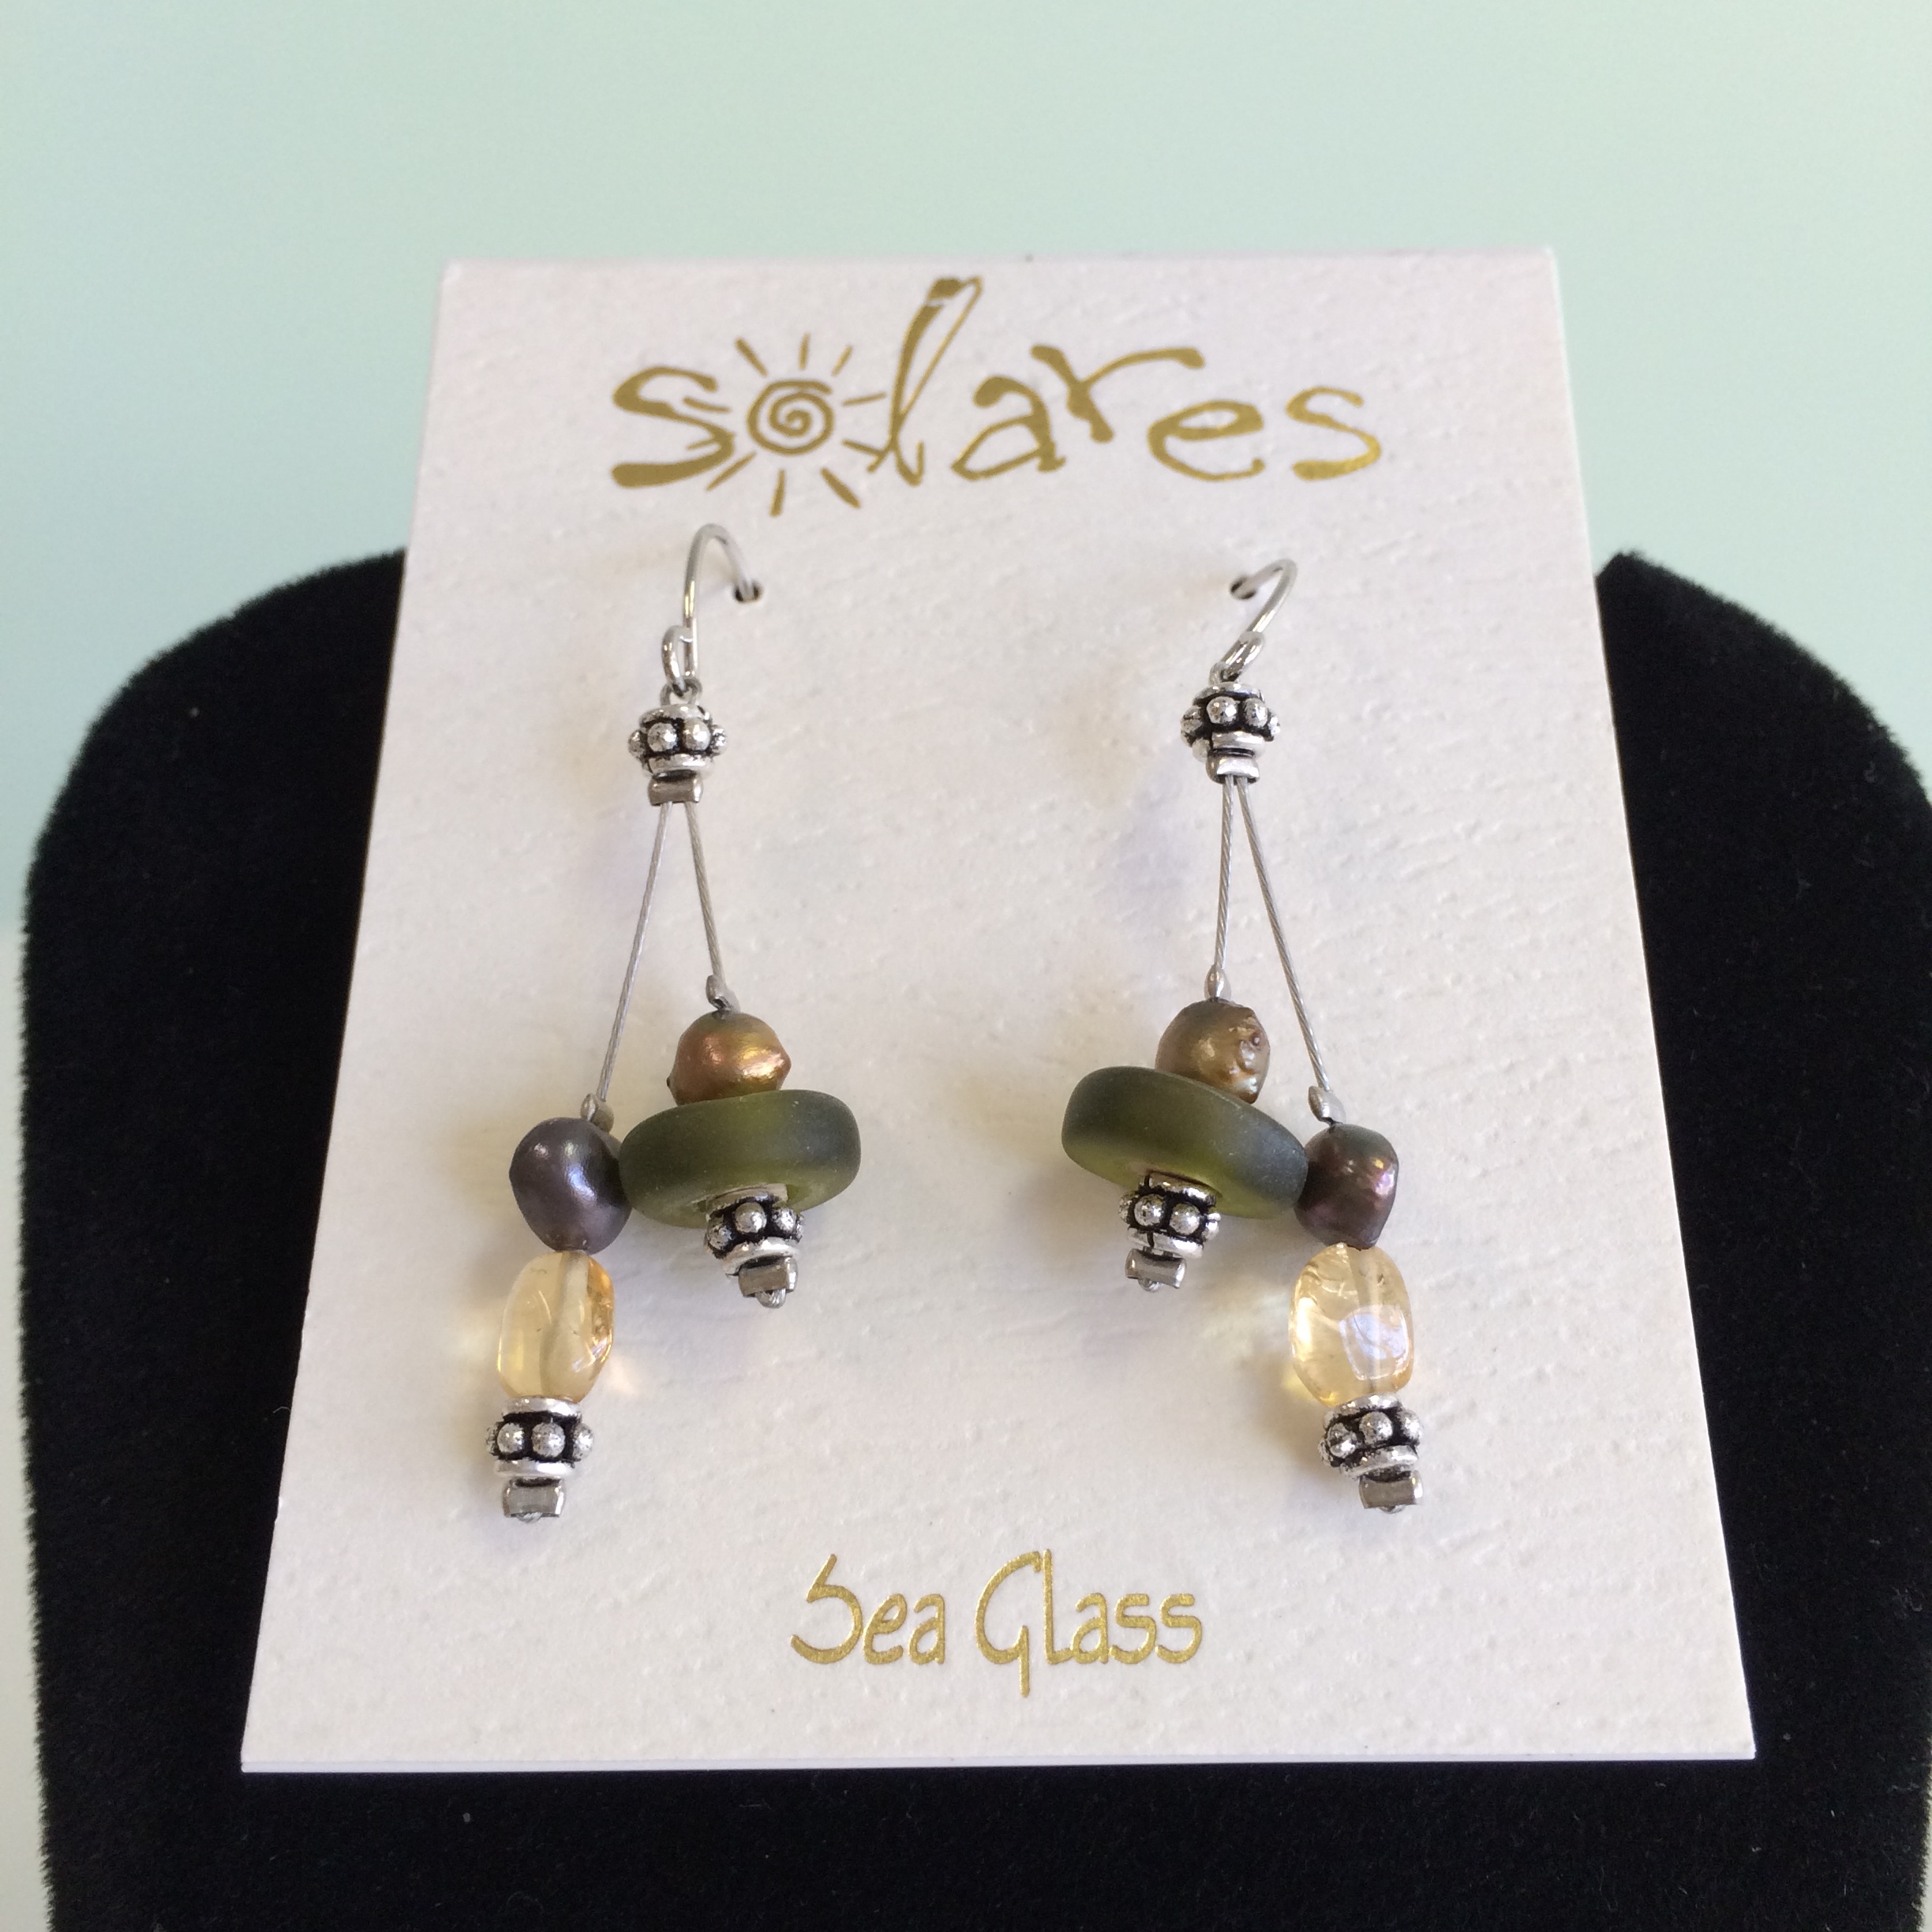 Icy Olive Recycled Sea Glass Earrings.